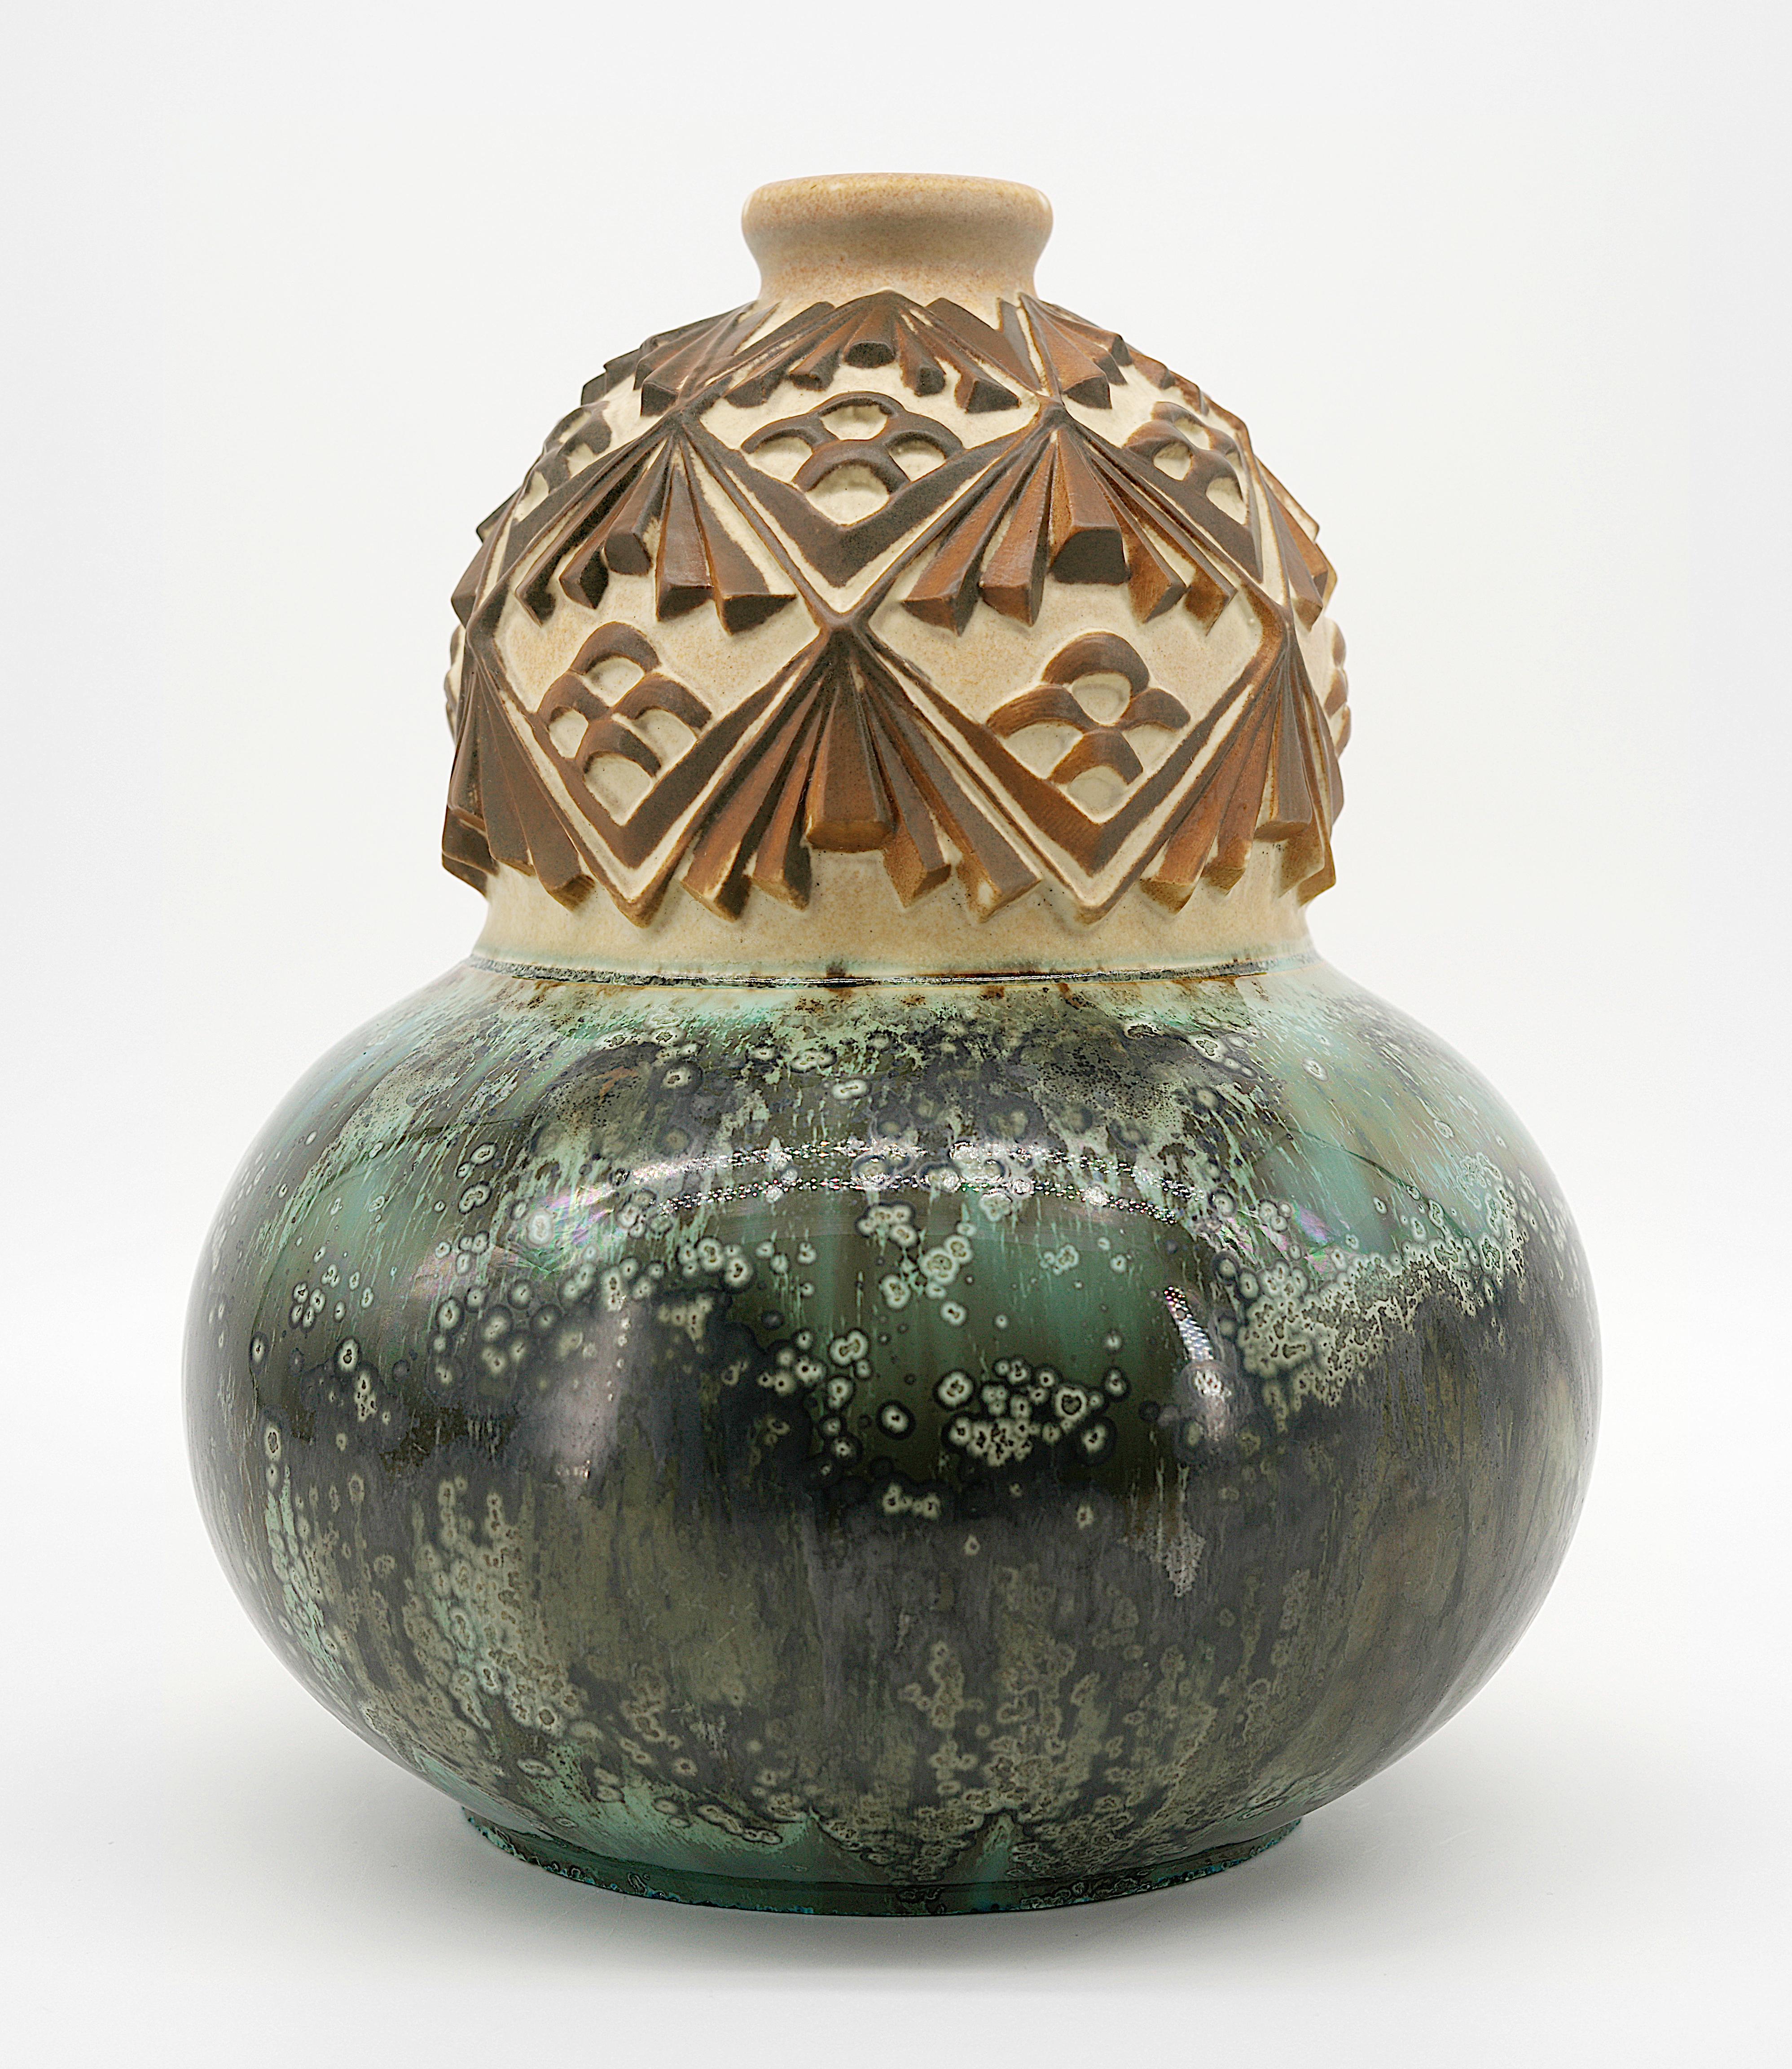 French Art Deco stoneware vase by Joseph MOUGIN (1876-1961), Luneville (Nancy), France, ca.1930. Coloquinte vase in stoneware, base covered with green crystallized enamel, upper part decorated with stylized pinecones and needles on a beige